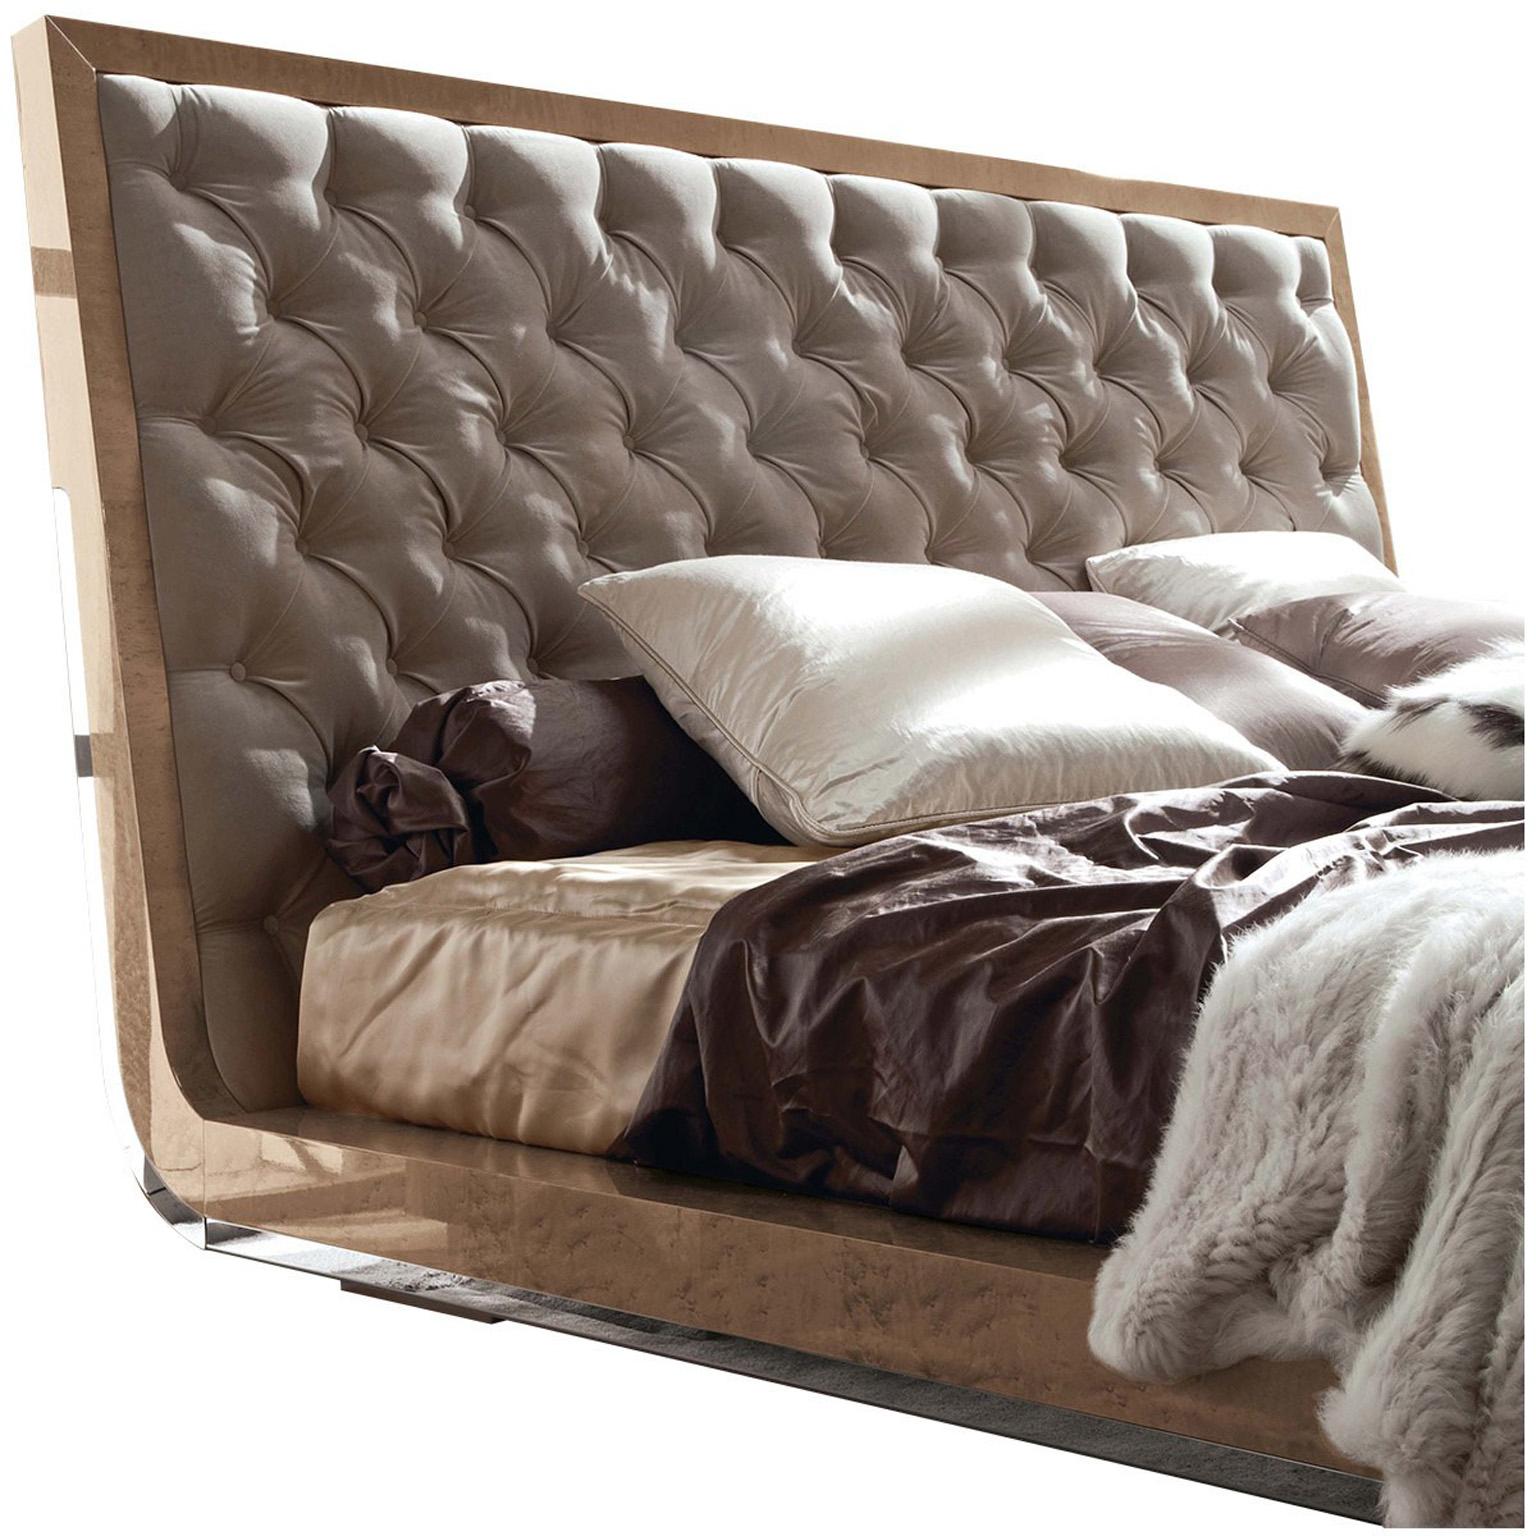 italien Giorgio Collection Tufted Upholstered Leather Headboard King Bed Sunrise en vente